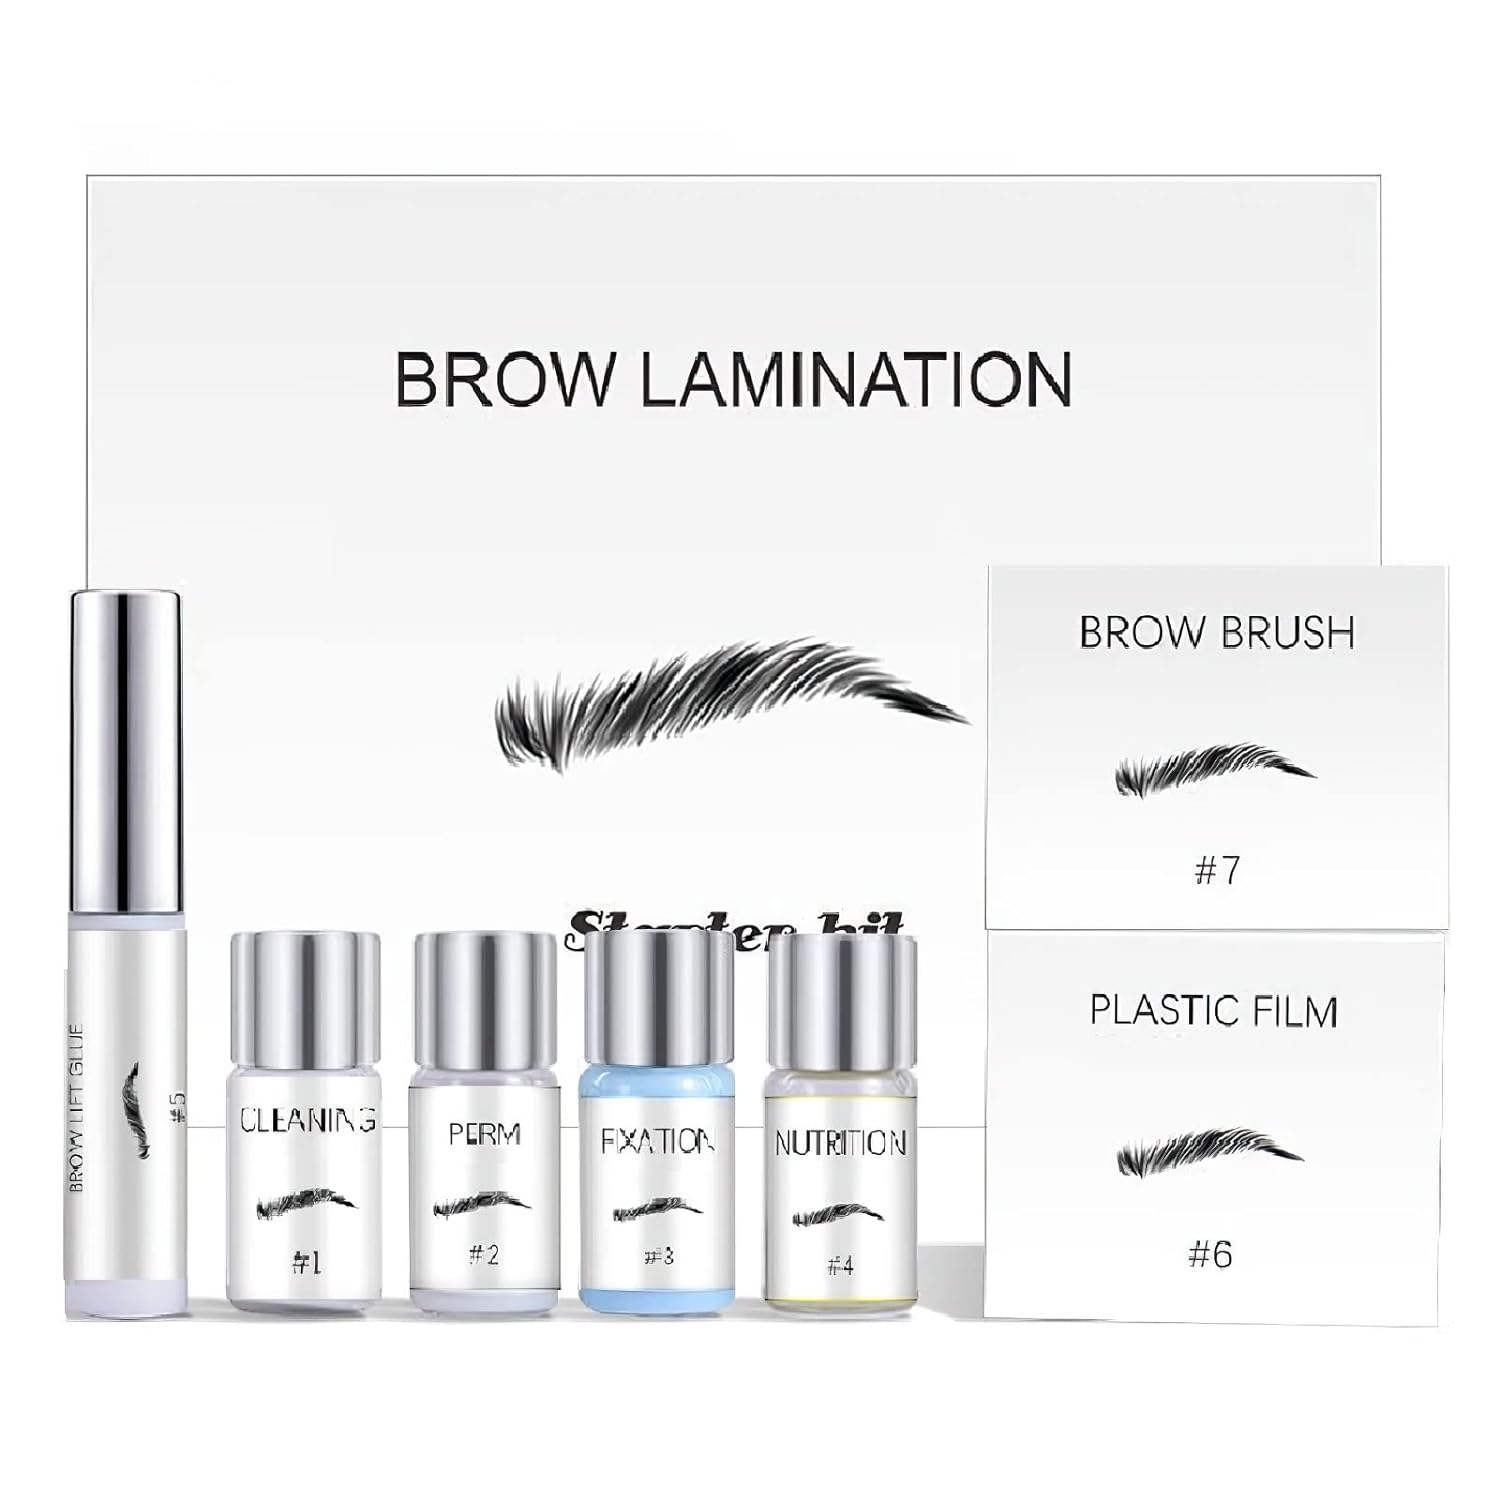 MIELIKKI Eyebrow Lamination Kit, DIY Eye Brow Lift Styling Kit, Fuller & Thicker Brows for 6 weeks, Easy to Use, Perfect for Salon, Home Use, Brow Brush and Brow Film Added